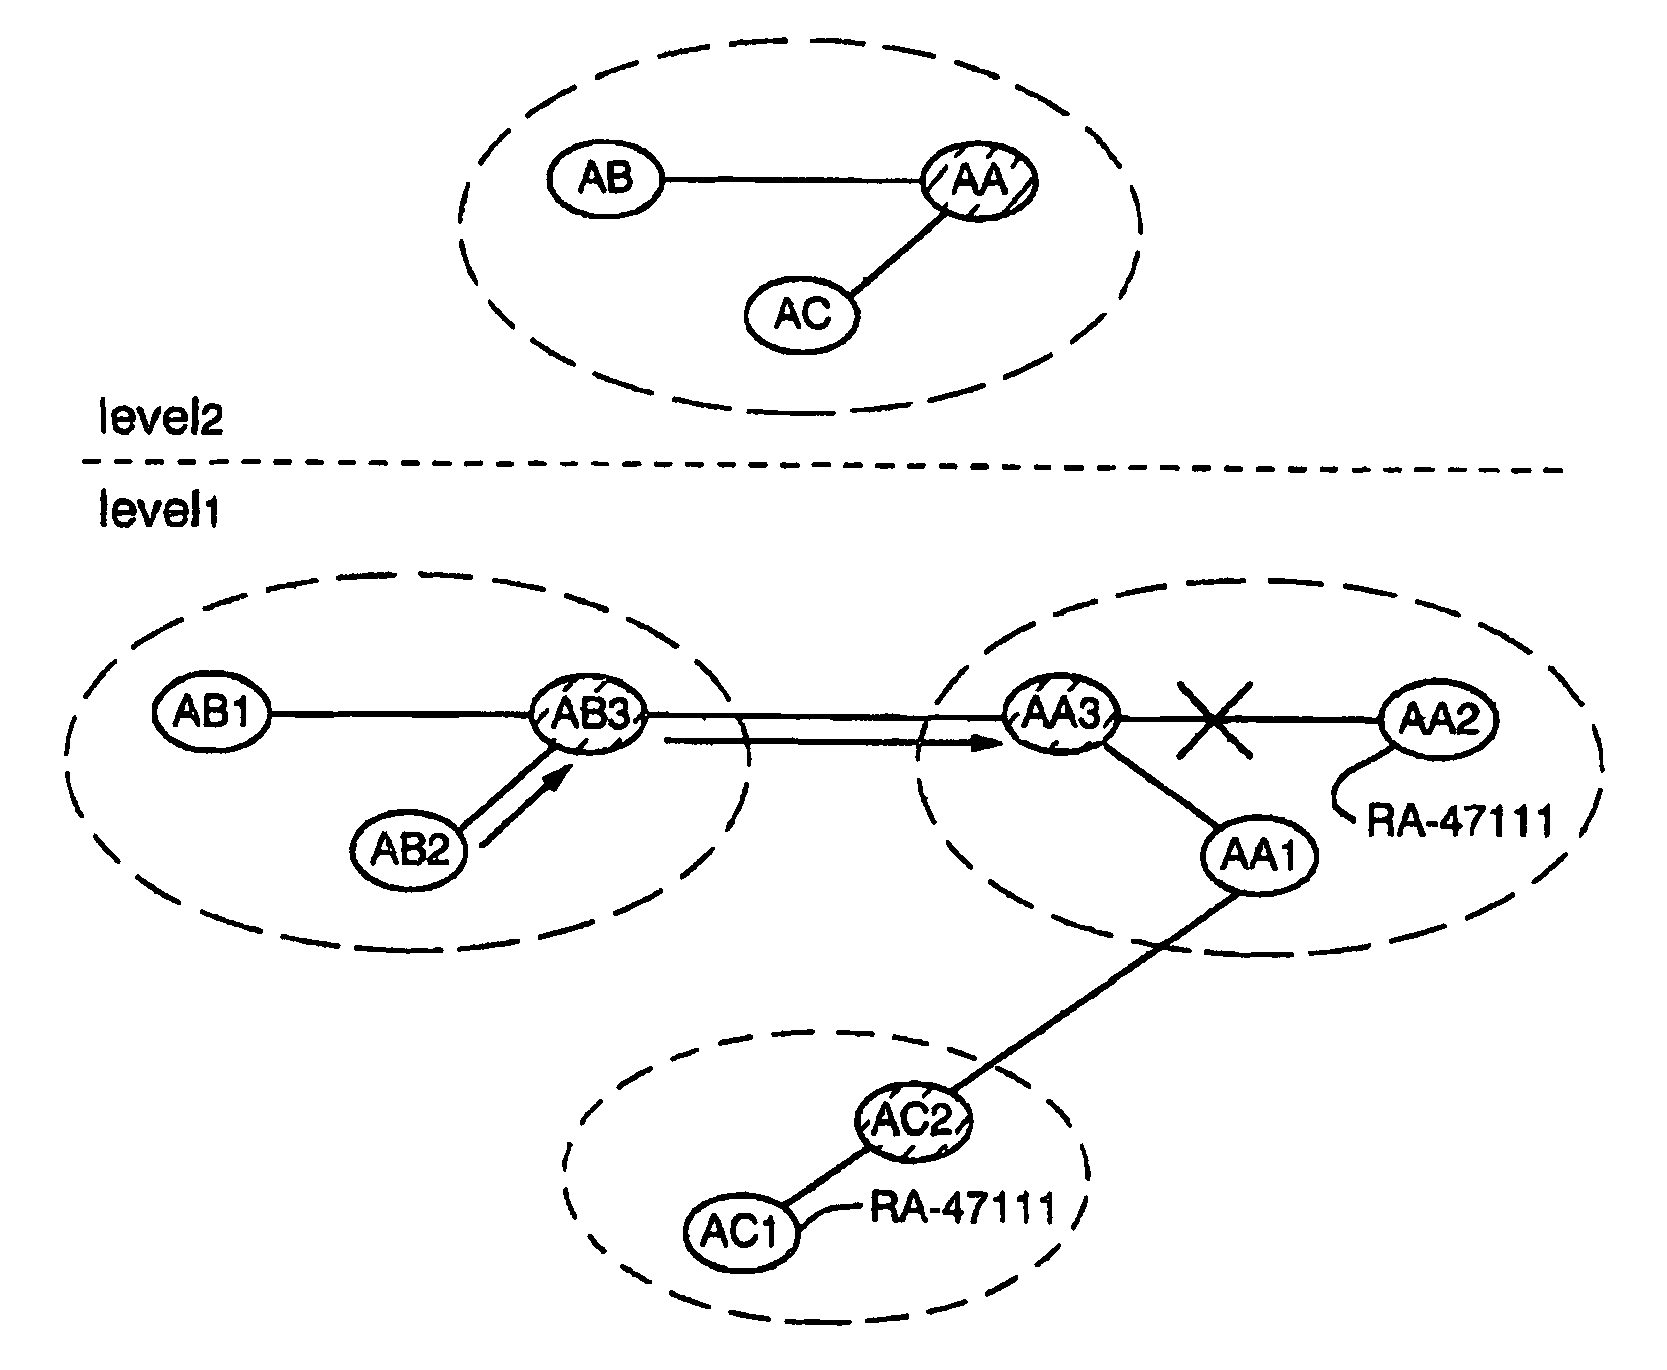 Address management in PNNI hierarchical networks